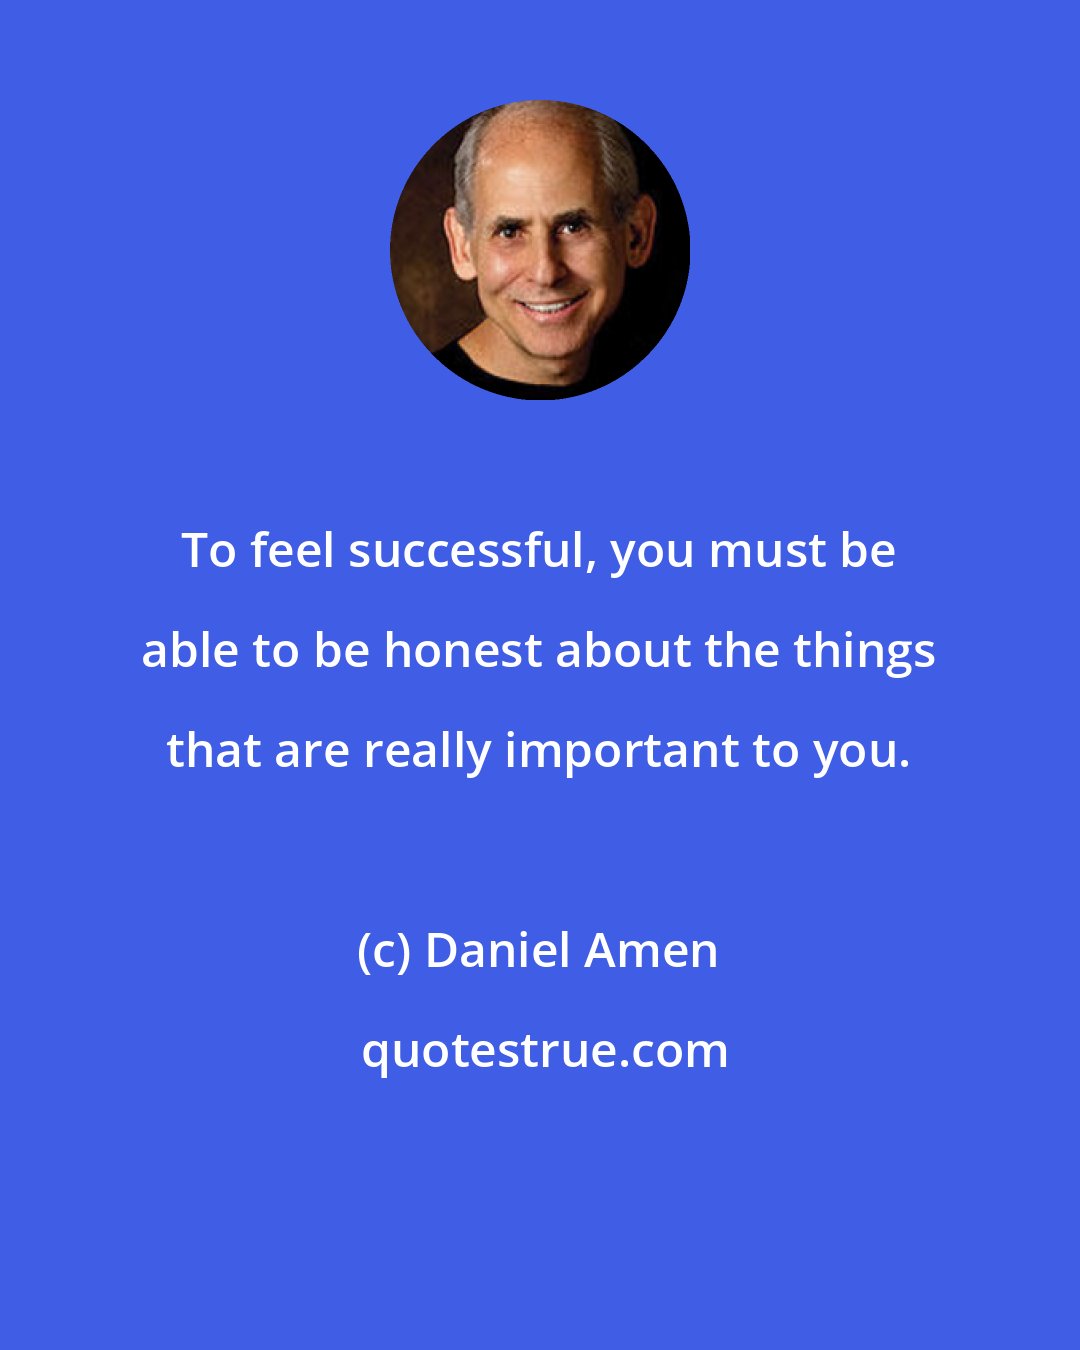 Daniel Amen: To feel successful, you must be able to be honest about the things that are really important to you.